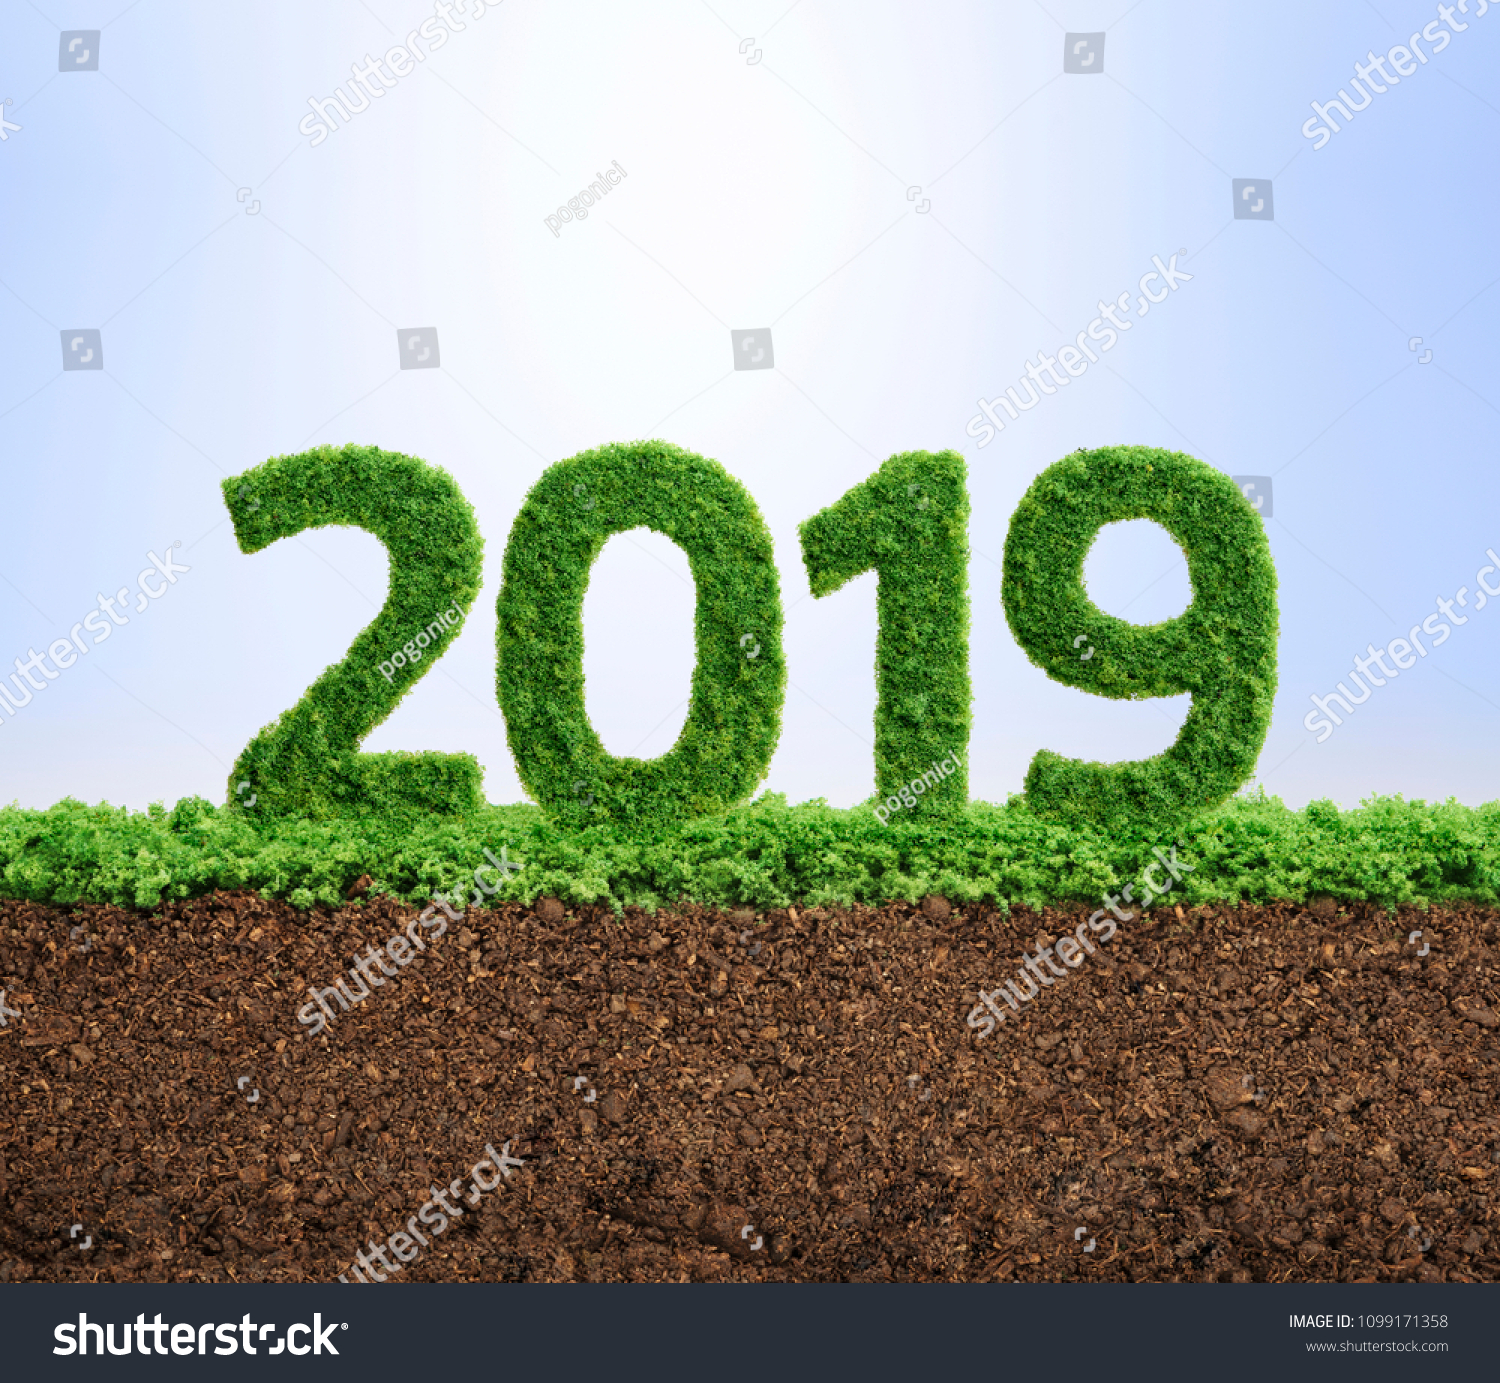 2019 is a good year for growth in environmental business. Grass growing in the shape of year 2019. #1099171358